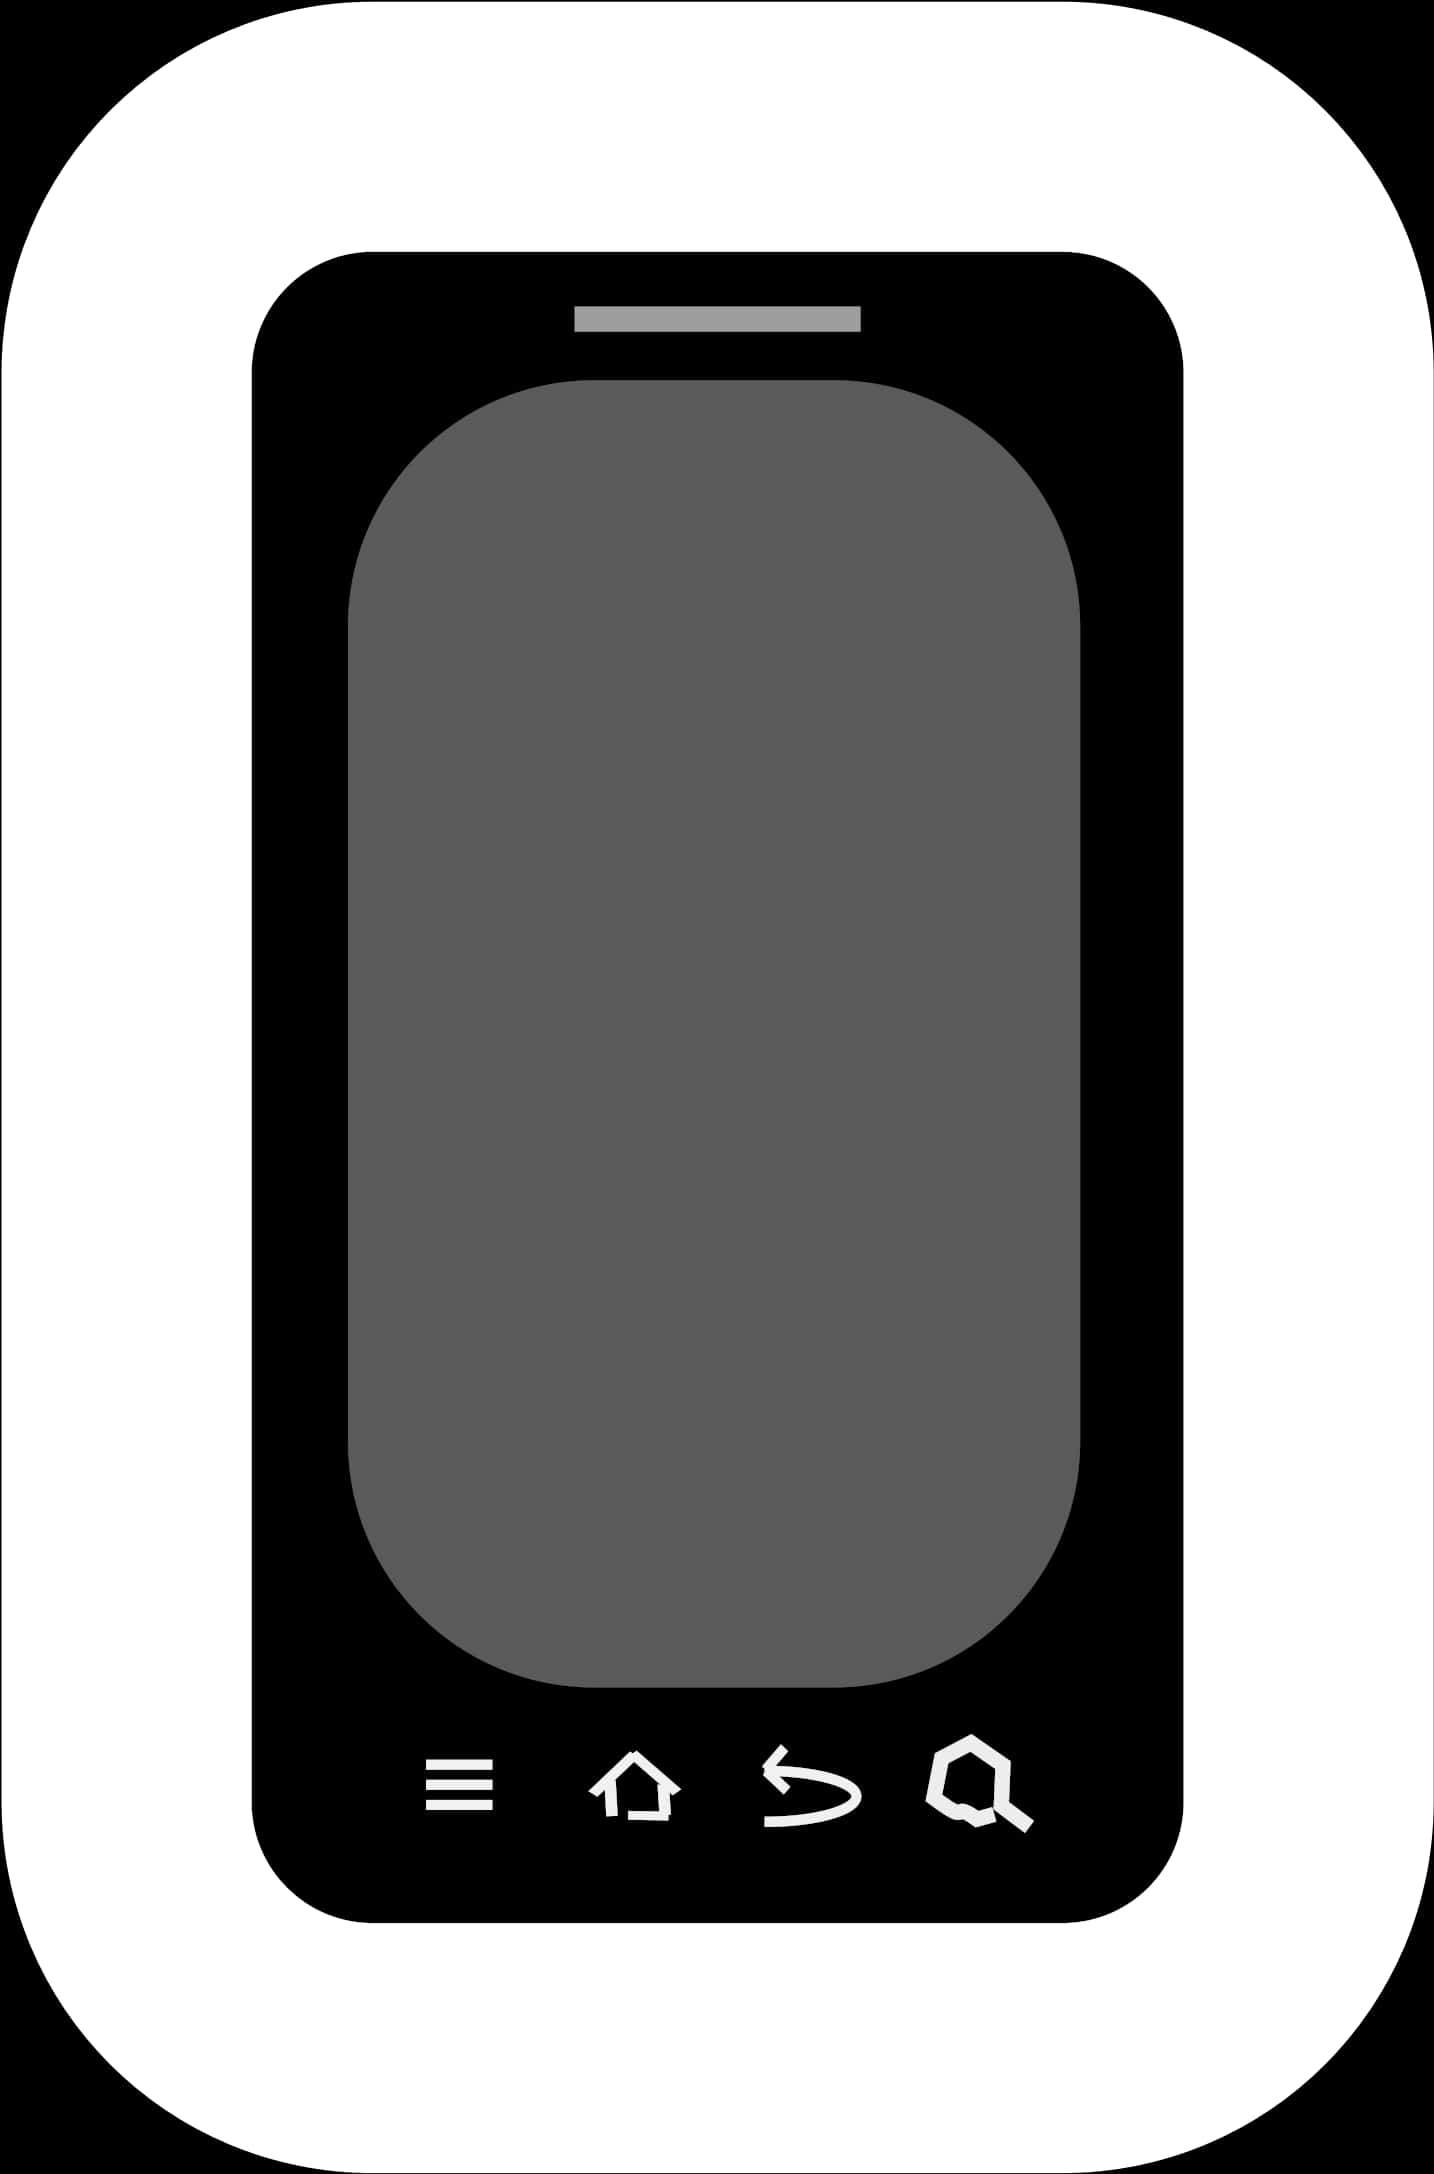 A Black Rectangular Object With A Grey Screen